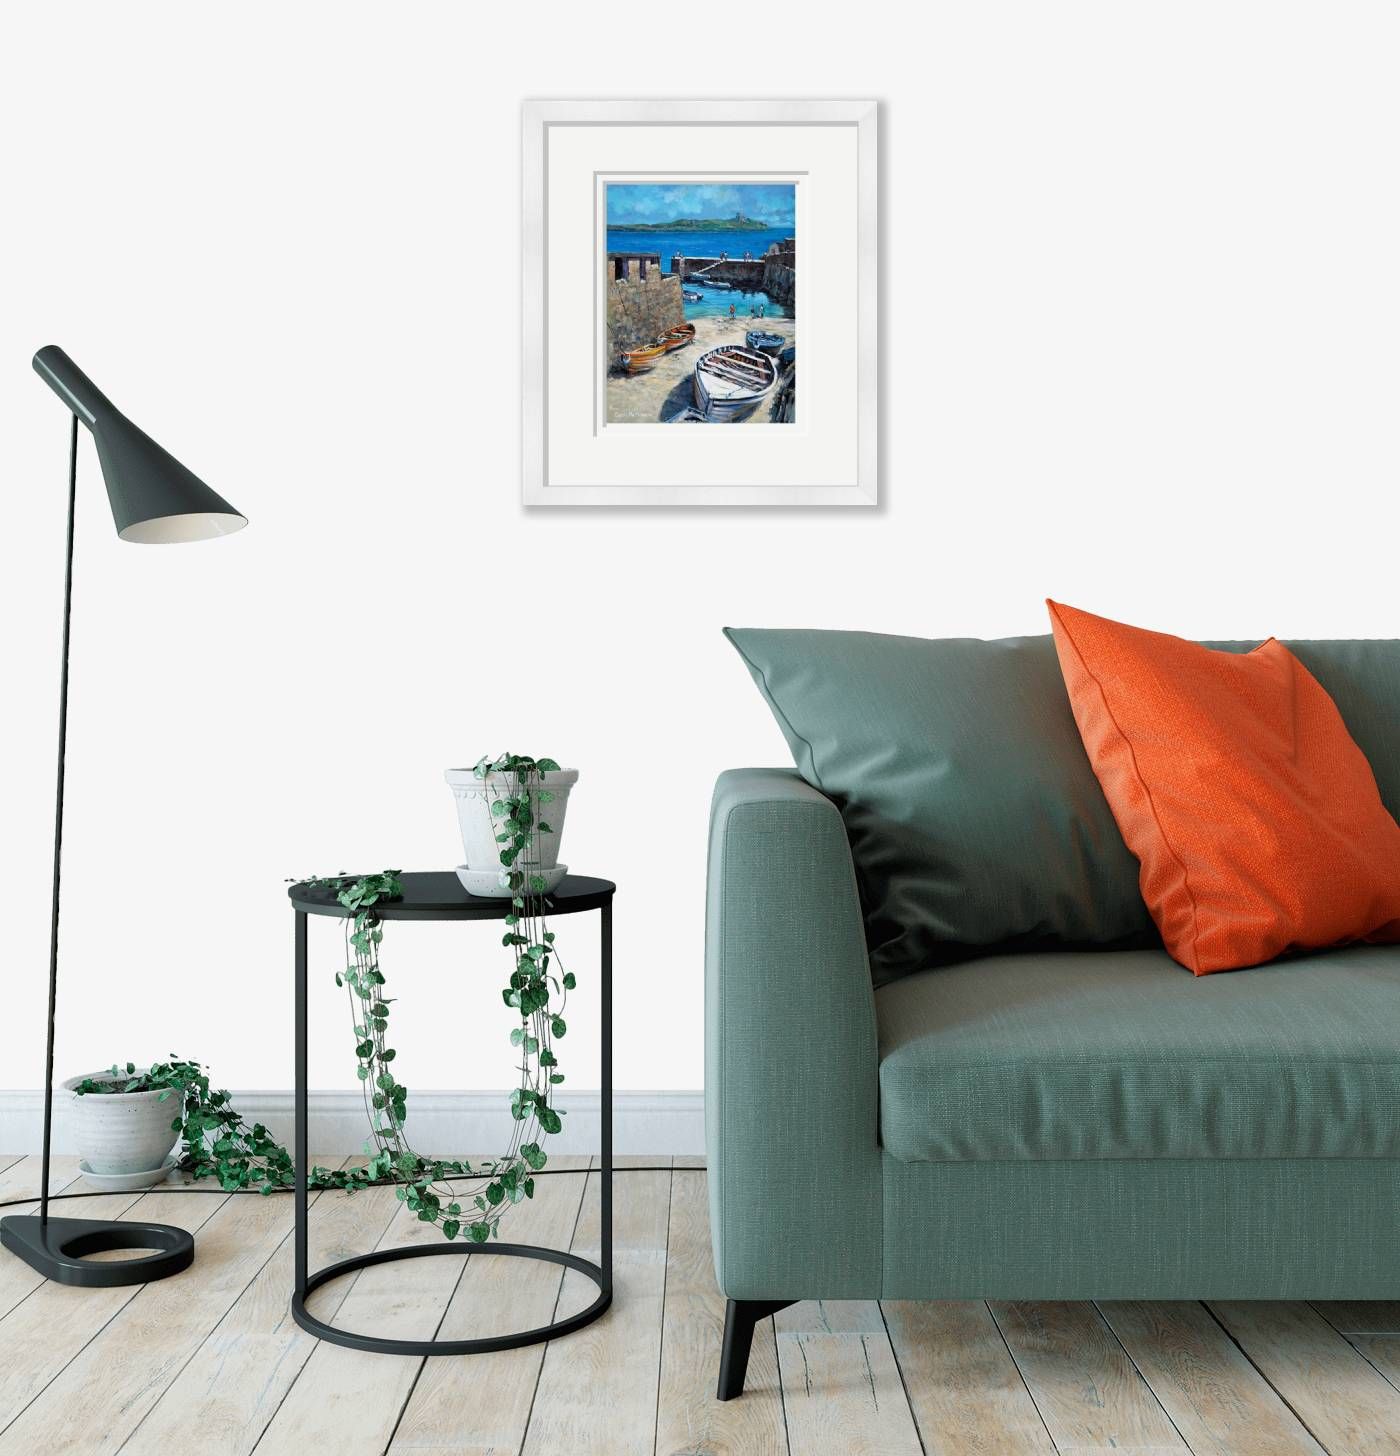 Medium framed - Coliemore Harbour, Dalkey, Co Dublin - 293  by Chris McMorrow